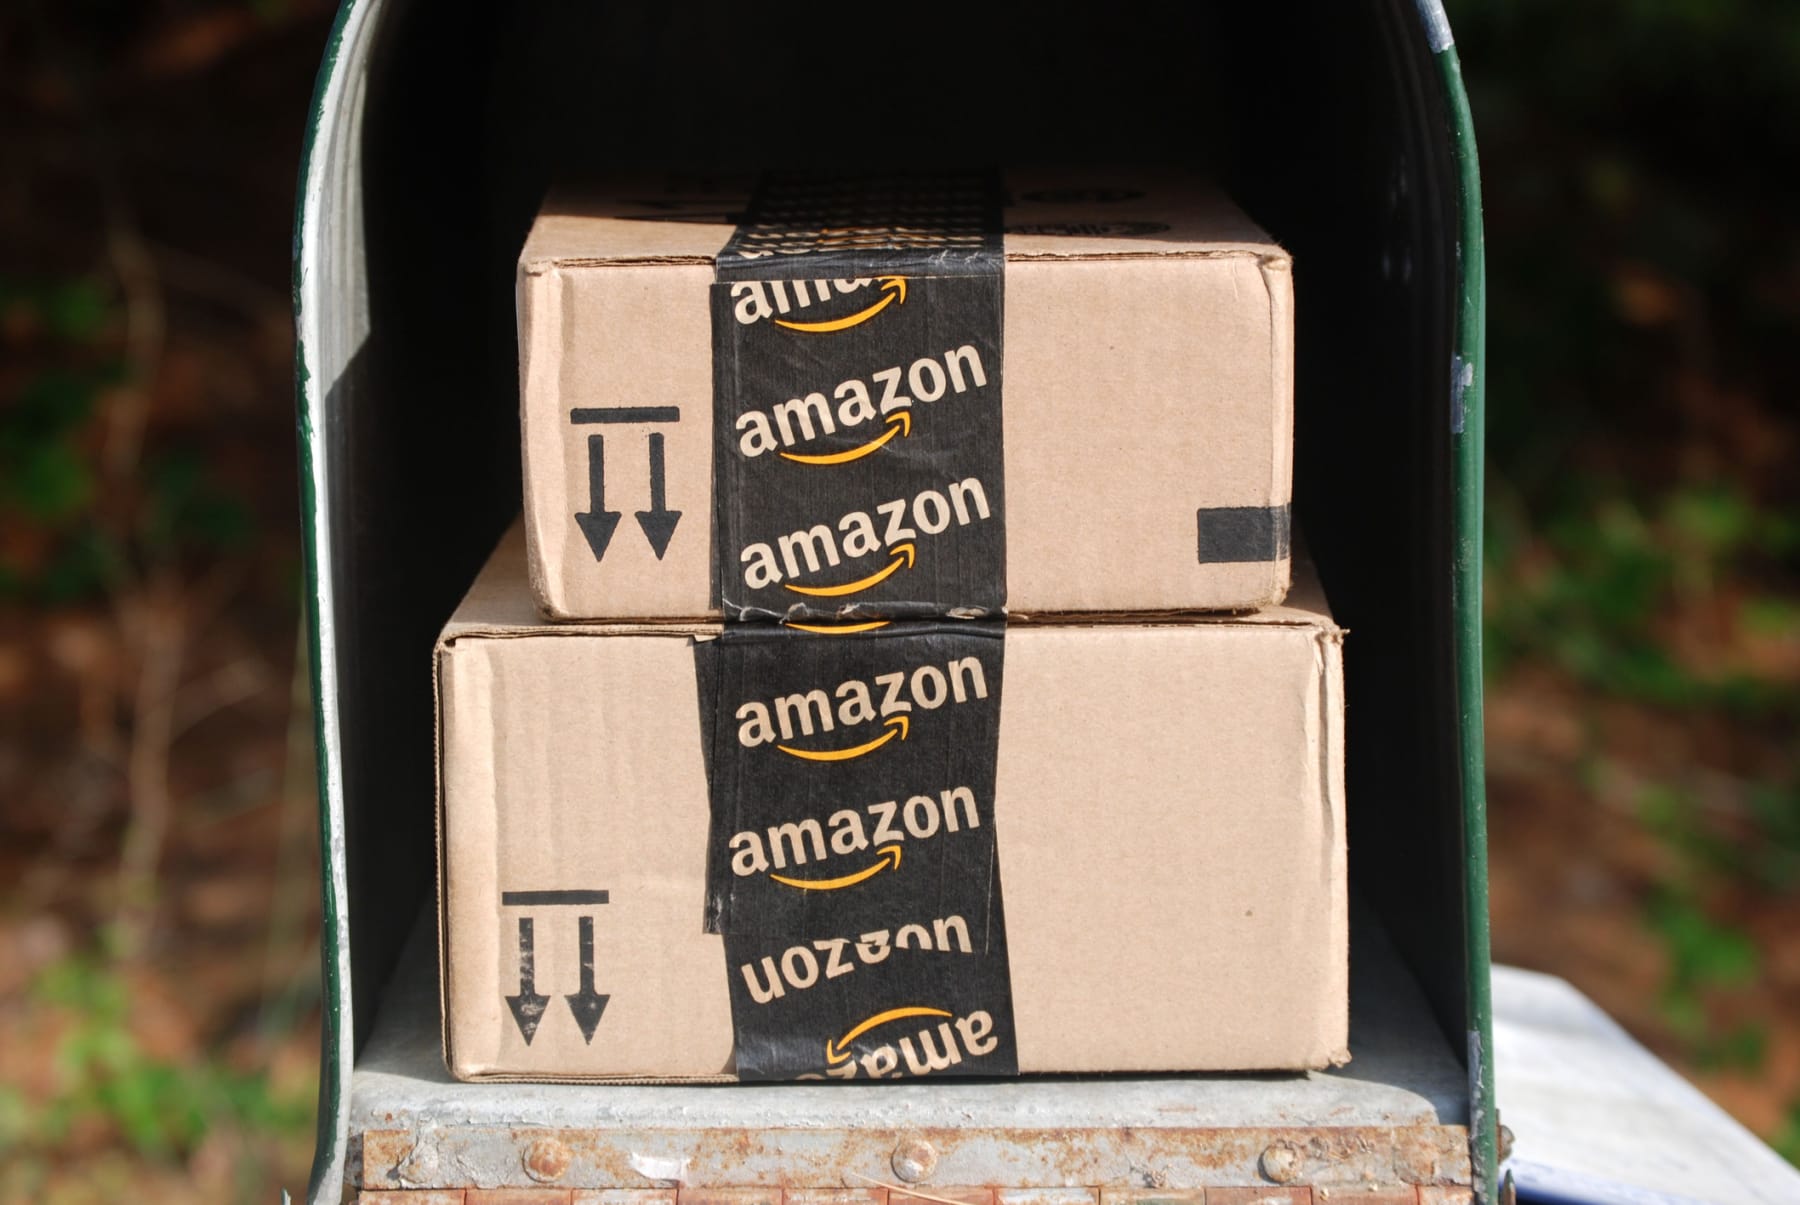 Amazon packages in mailbox